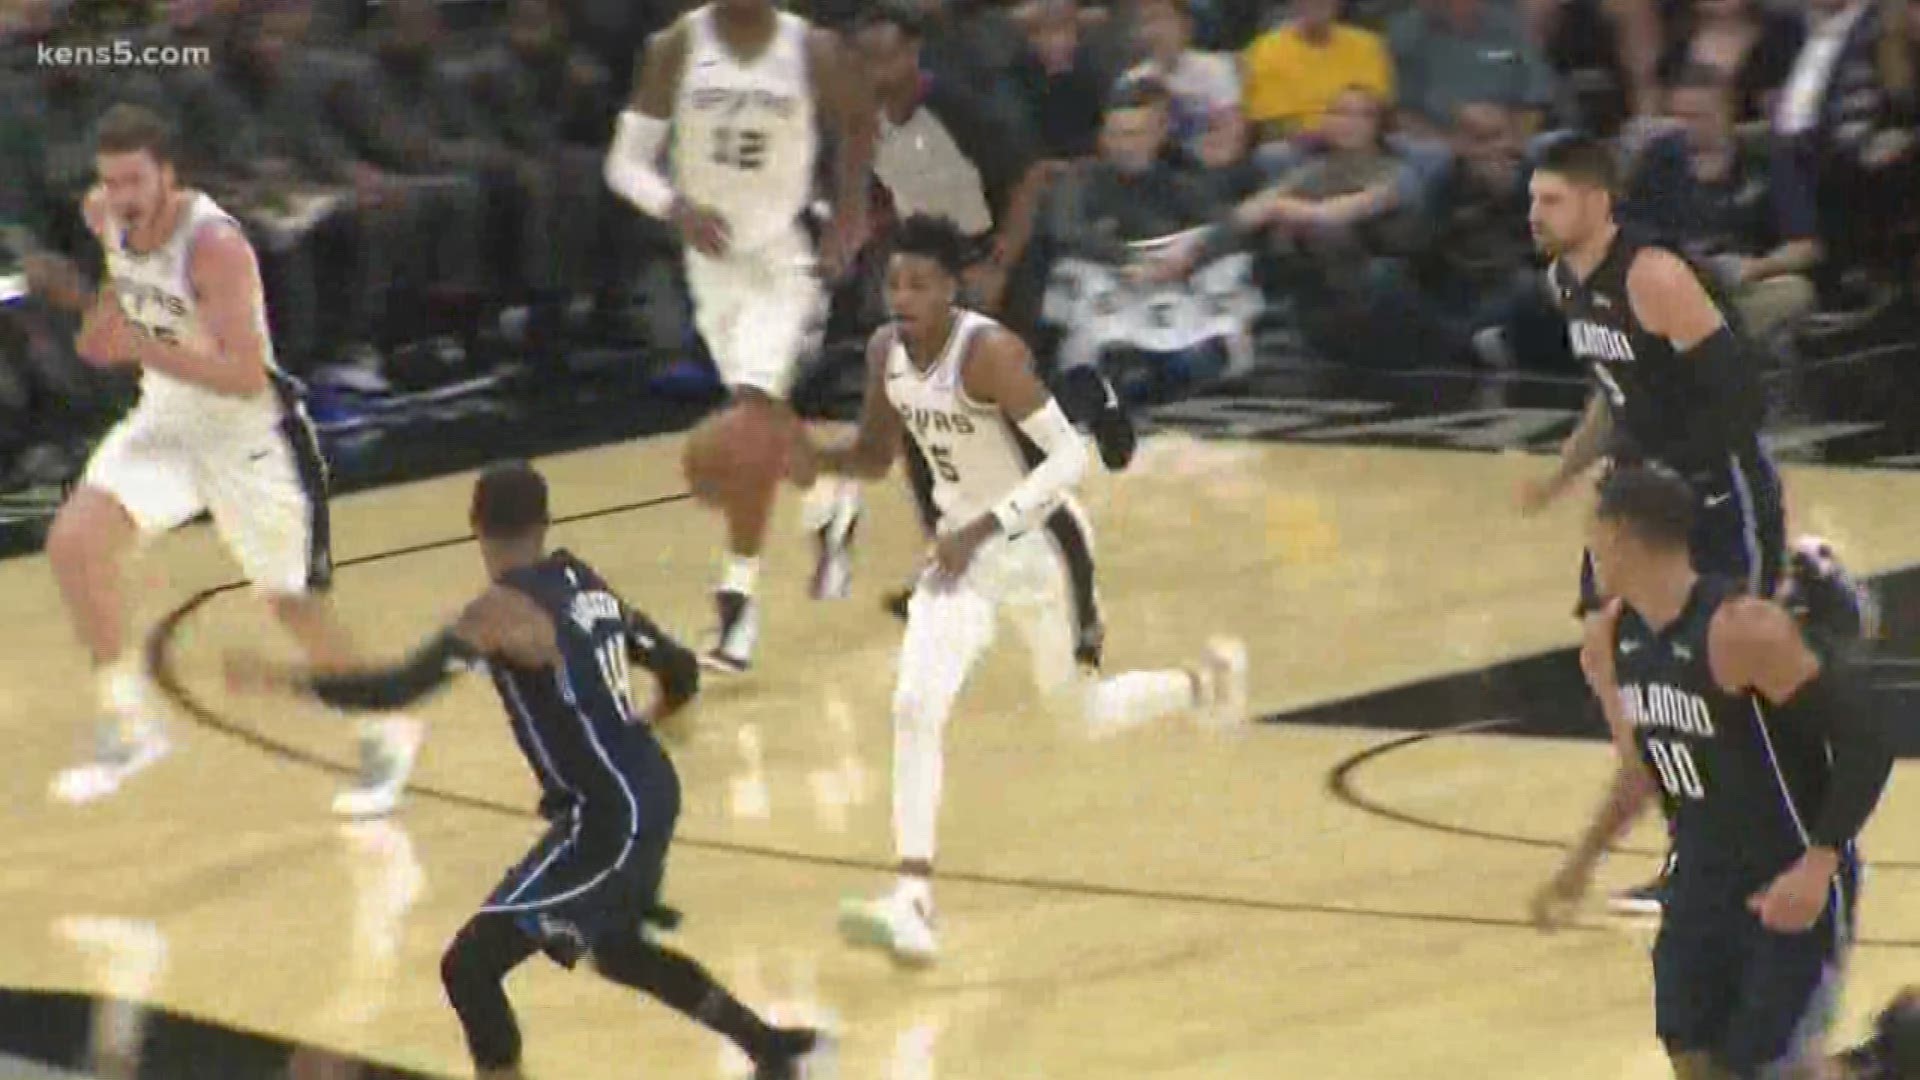 The play of point guard Dejounte Murray, back from a major injury, was a highlight of the first preseason game of 2019.